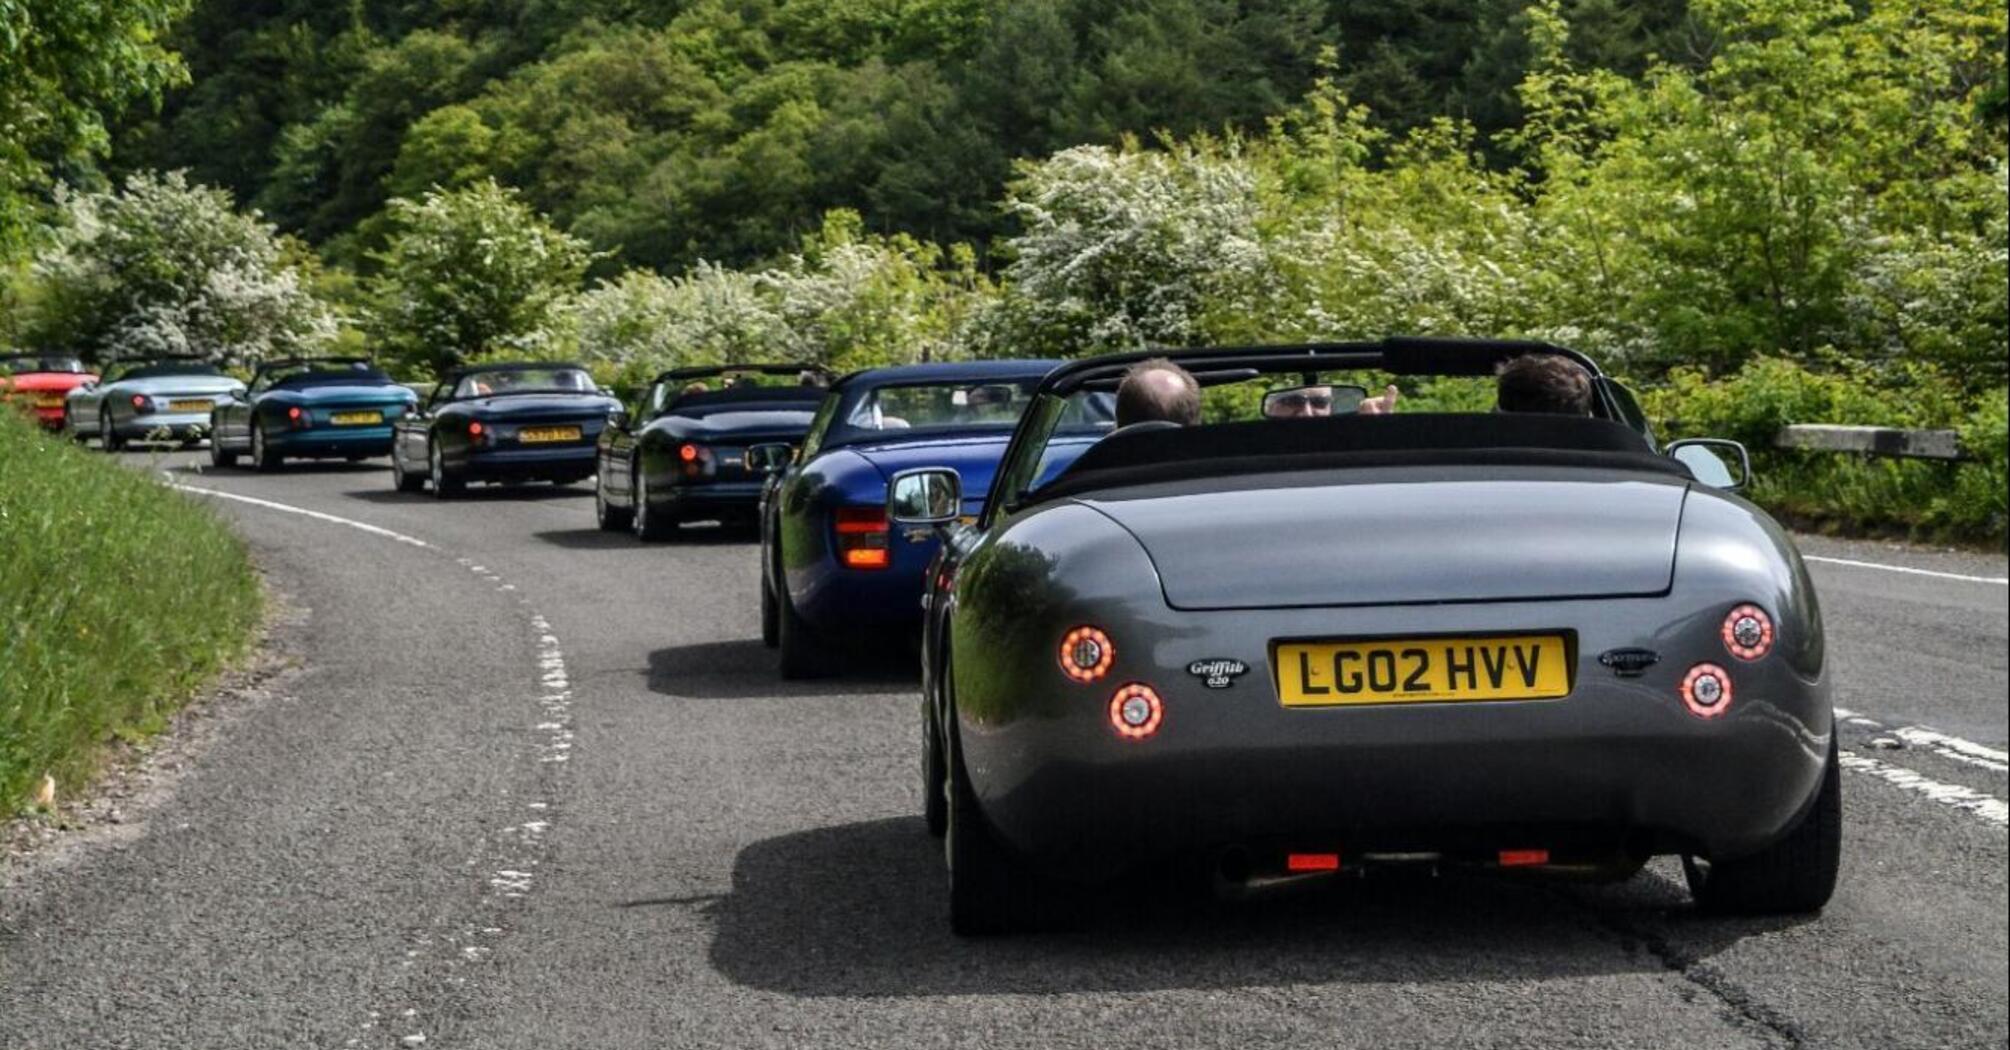 Cars driving on a road through a lush green forest in the Peak District